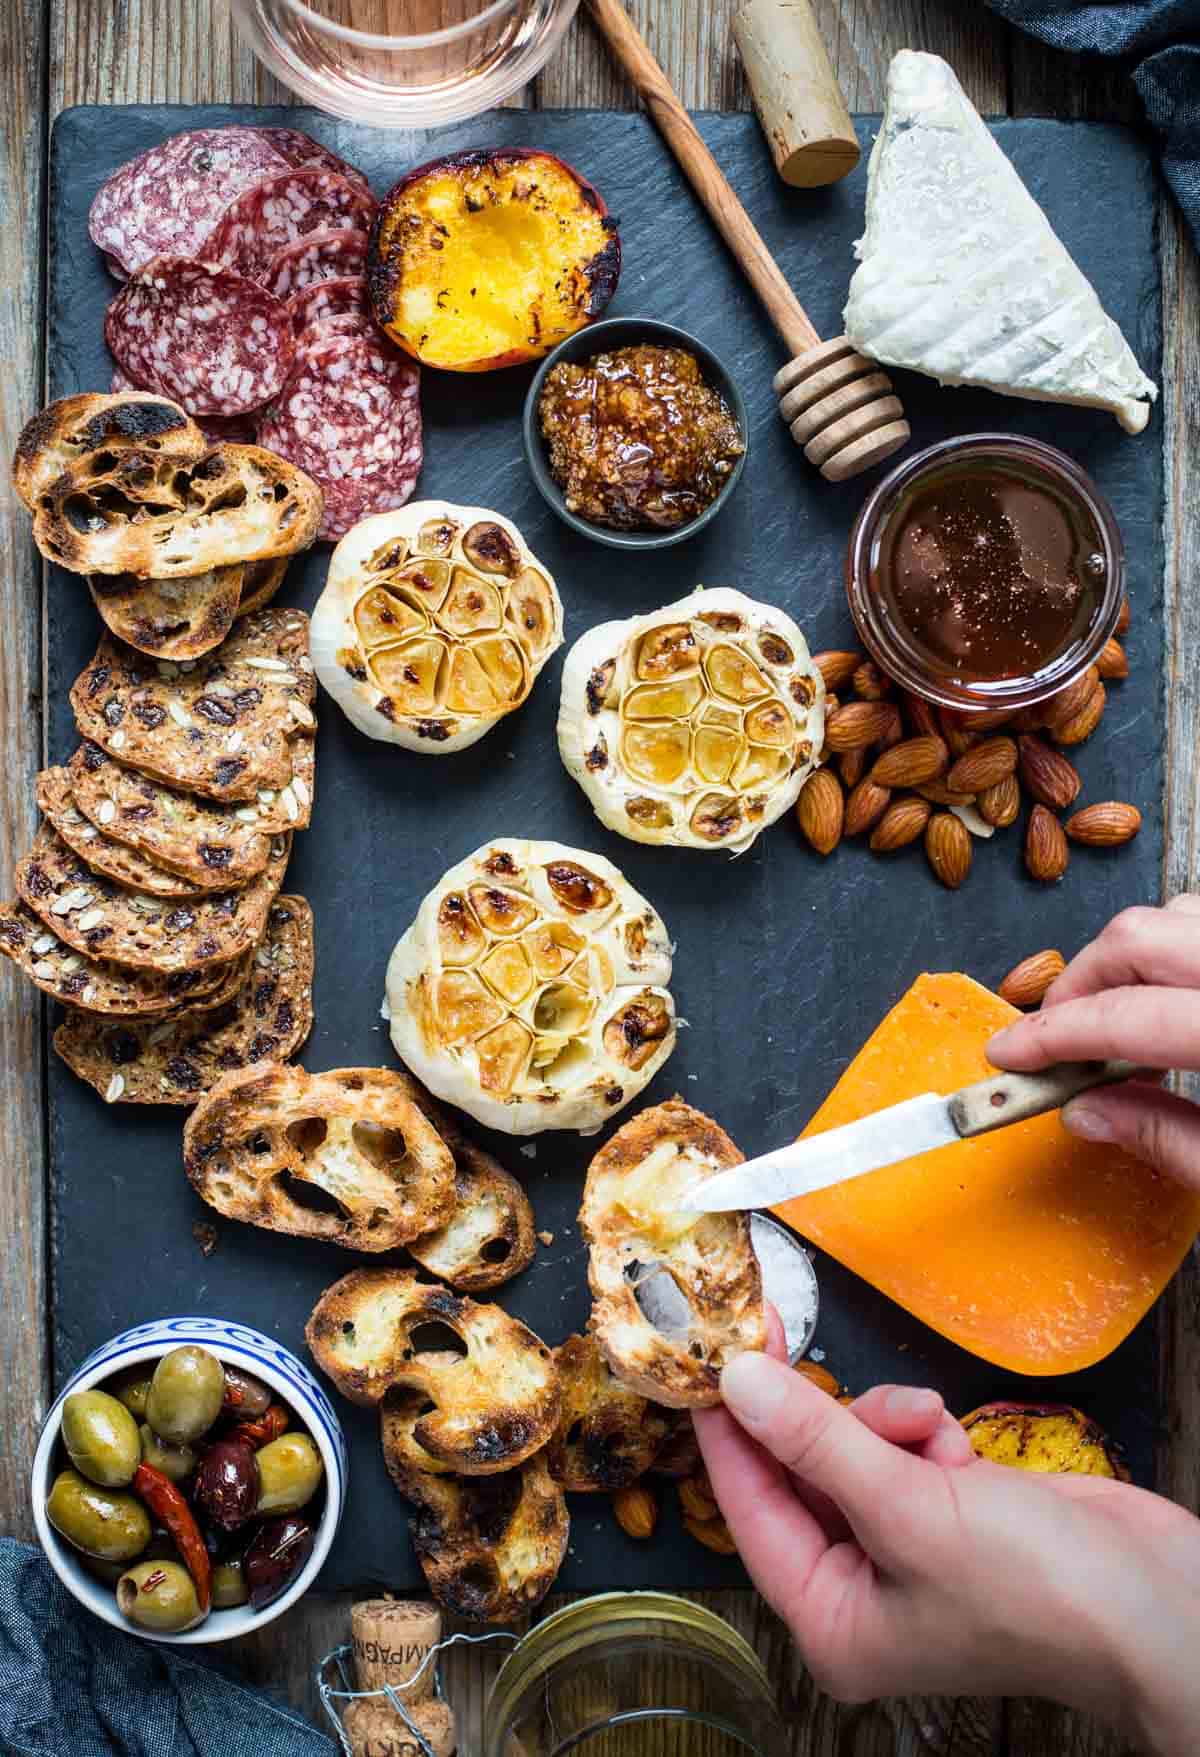 a platter with roasted garlic and spreading it over toasted baguette